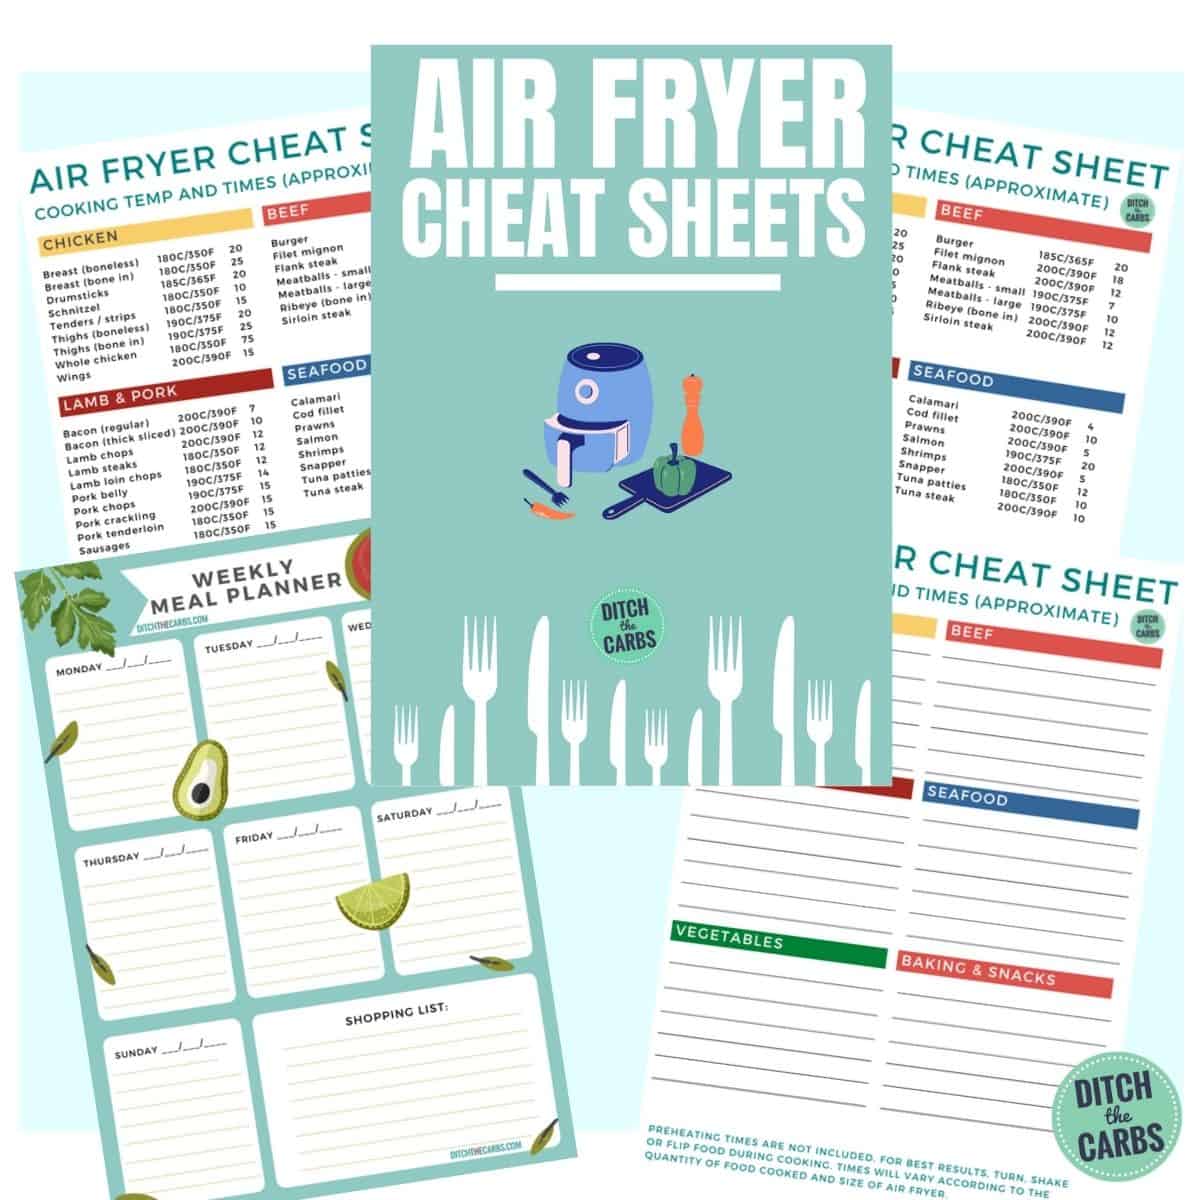 https://thinlicious.com/wp-content/uploads/2021/08/How-To-Use-An-Air-Fryer-FREE-Air-Fryer-Cooking-Charts-1200x1200-3-1.jpg